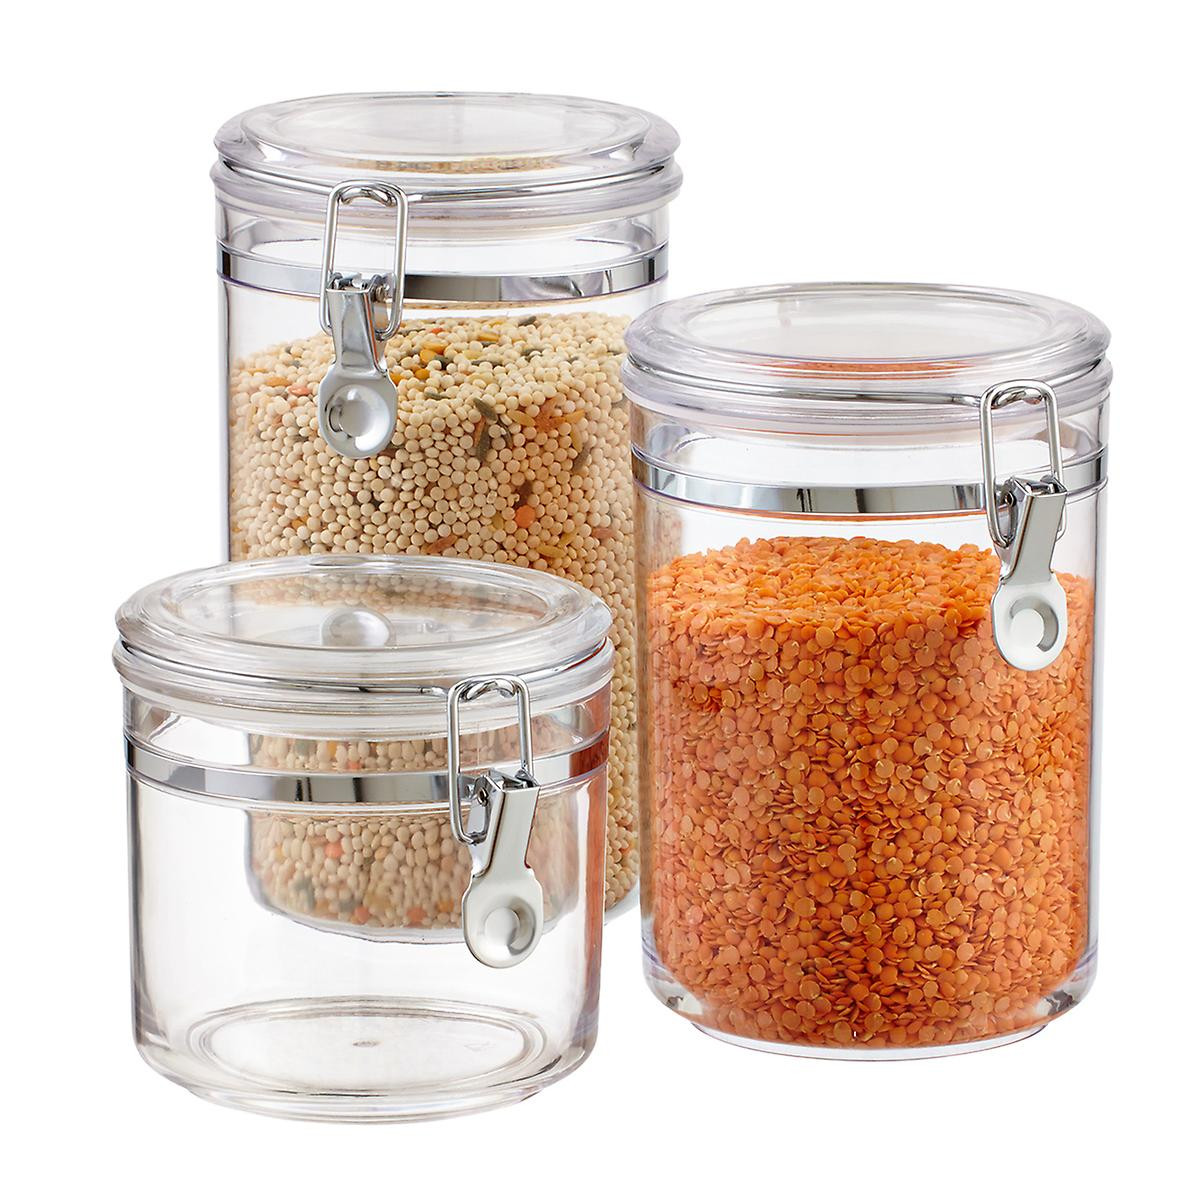 Kitchen Storage Canisters
 Hermetic Acrylic Canisters